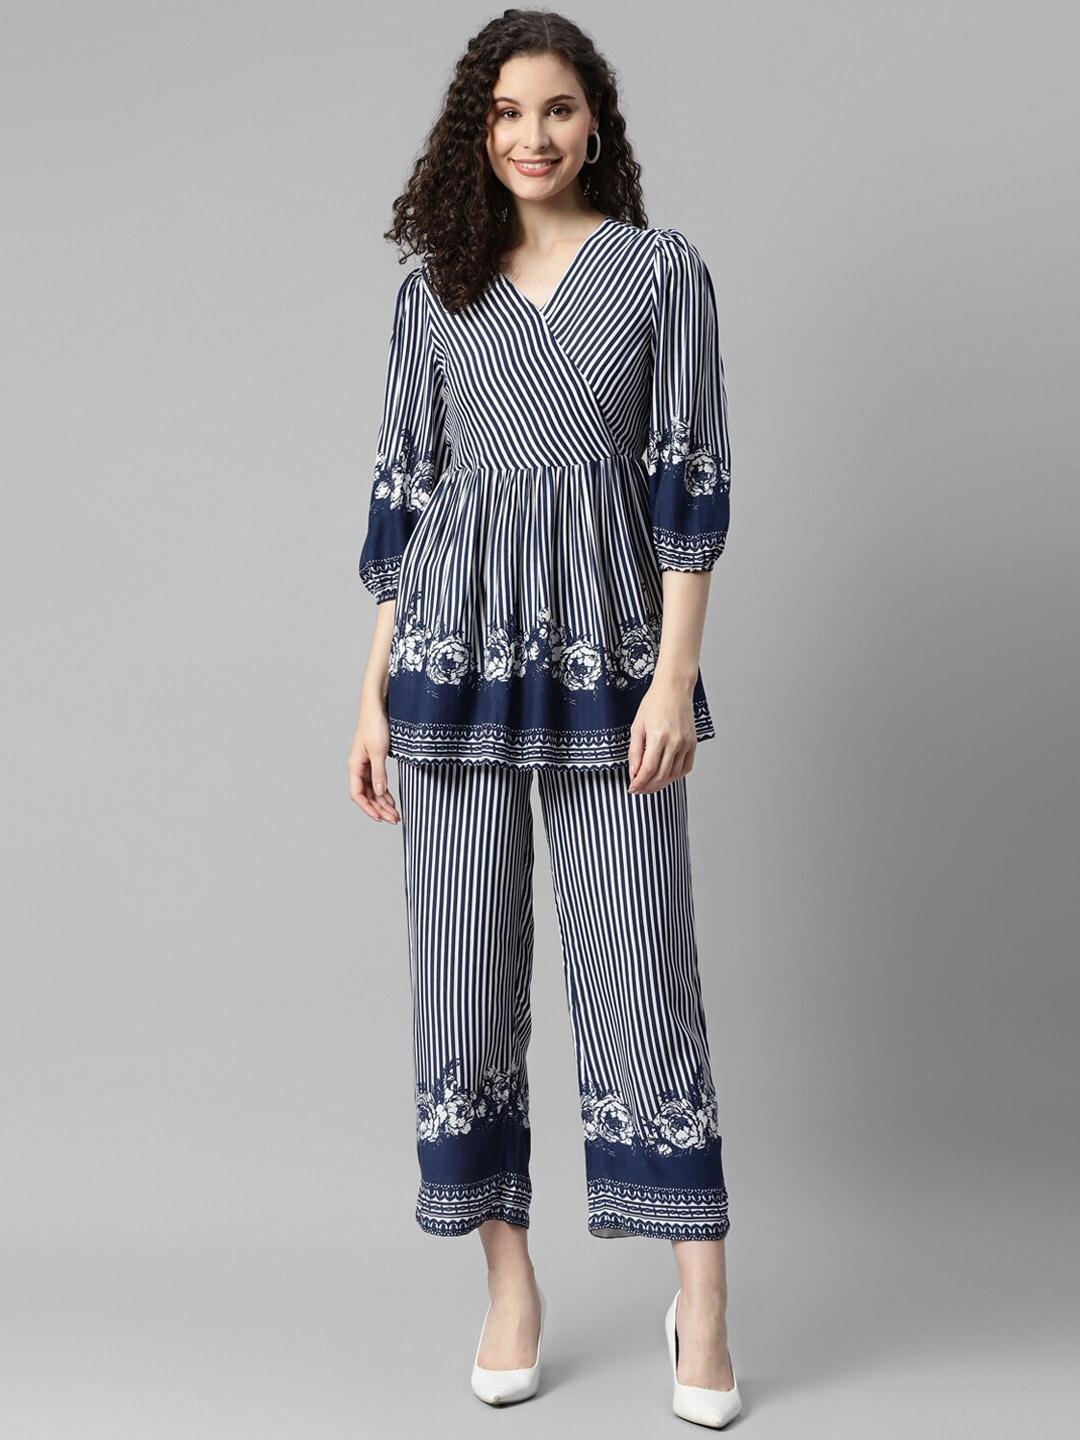 deebaco striped v-neck top and palazzos co-ords